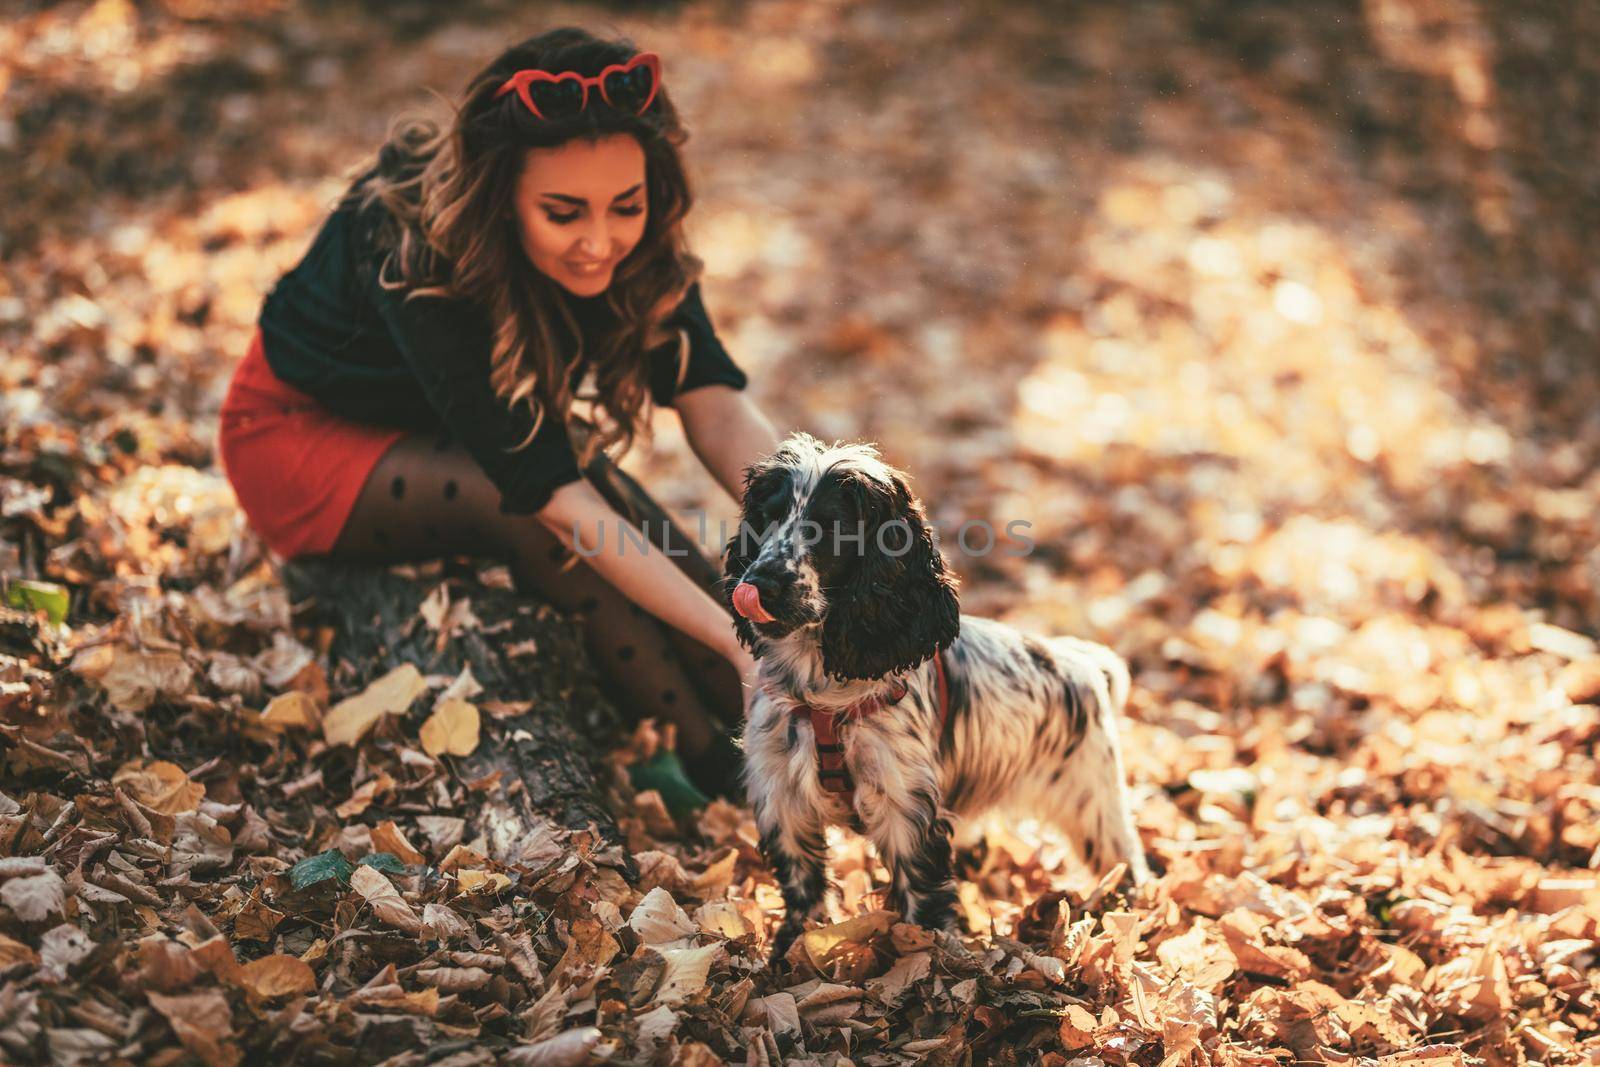 Cute young woman enjoying in city park in autumn colors. She is sitting on the ground covered with leaves and having fun with her dog.